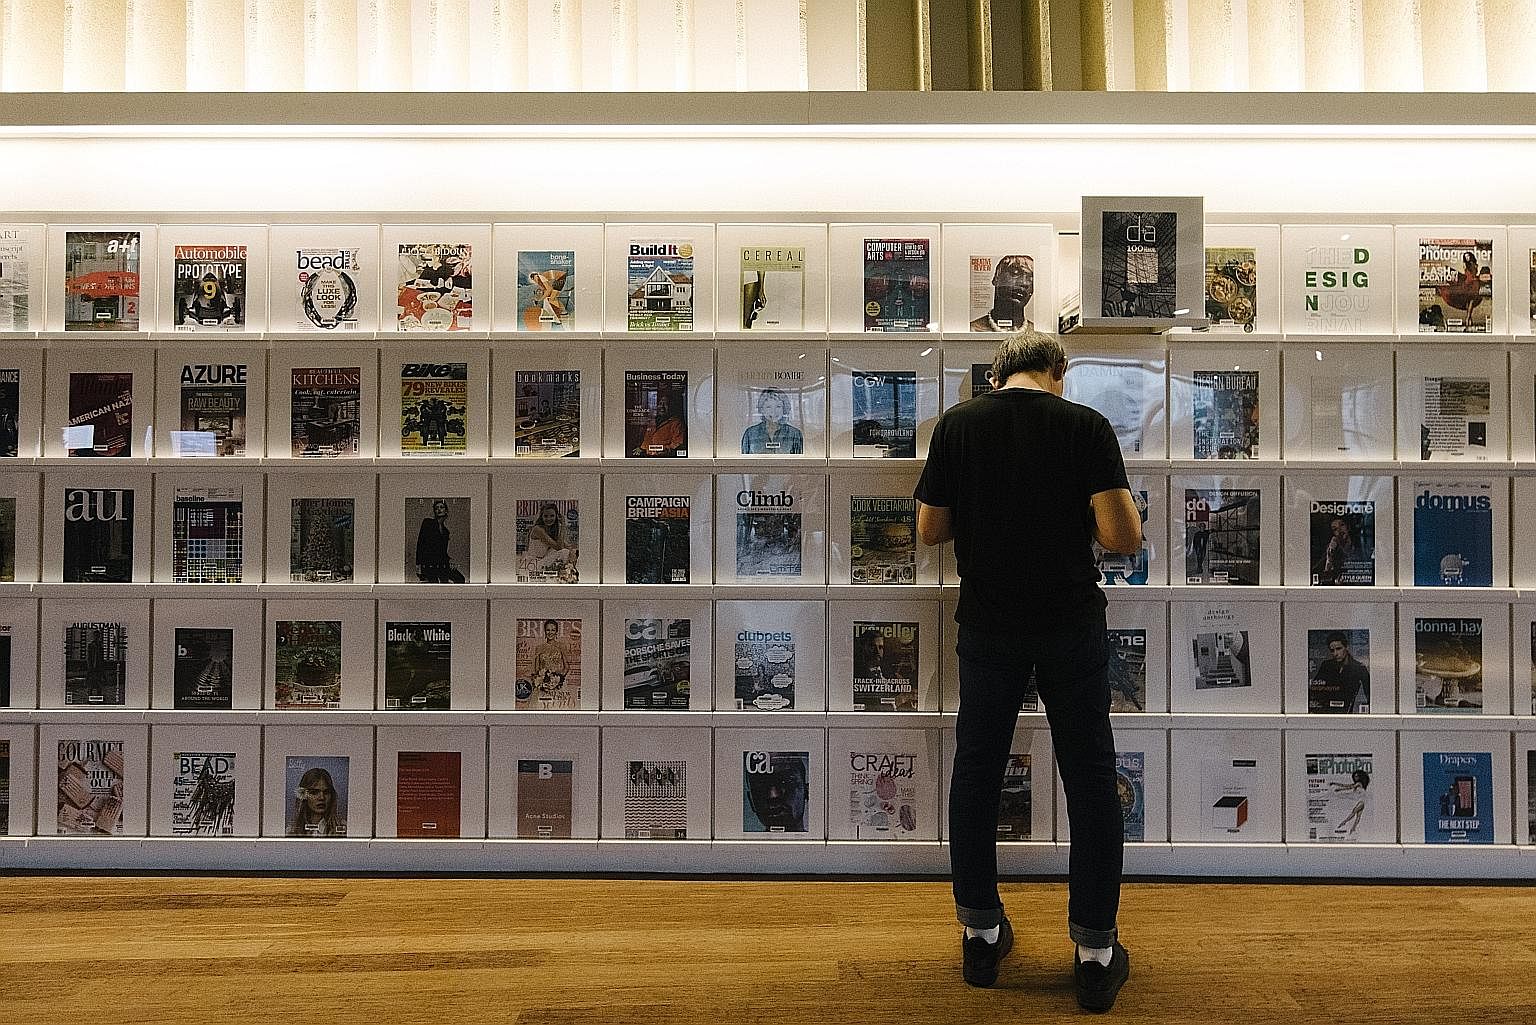 A reader at library@orchard at the magazine wall. Located at Orchardgateway, the library has a focus on design.